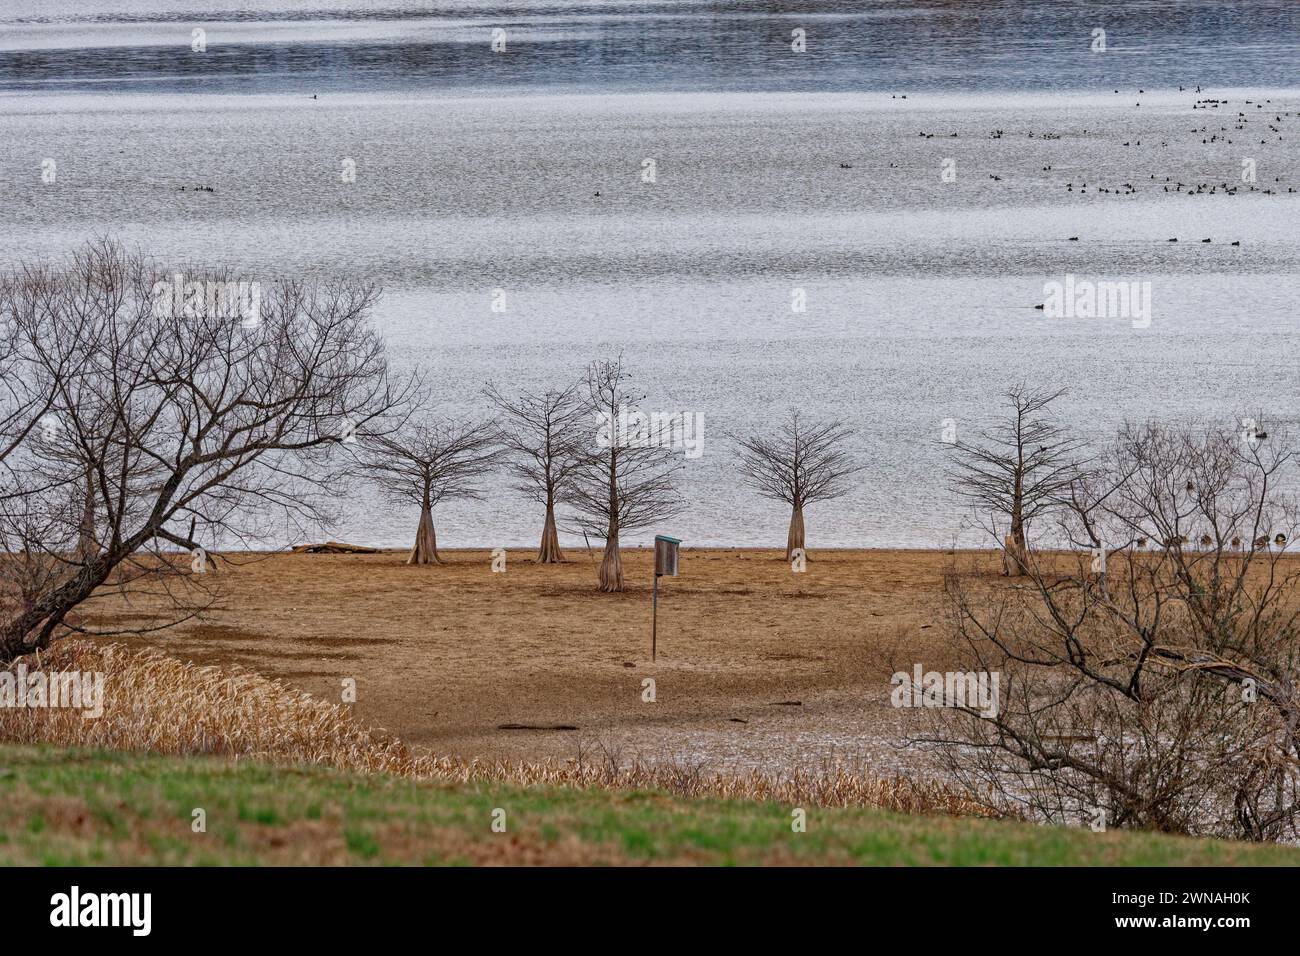 A view of the bare cypress trees on a beach at the Hiwassee wildlife refuge with the water levels low and the ducks on the lake in the background in w Stock Photo